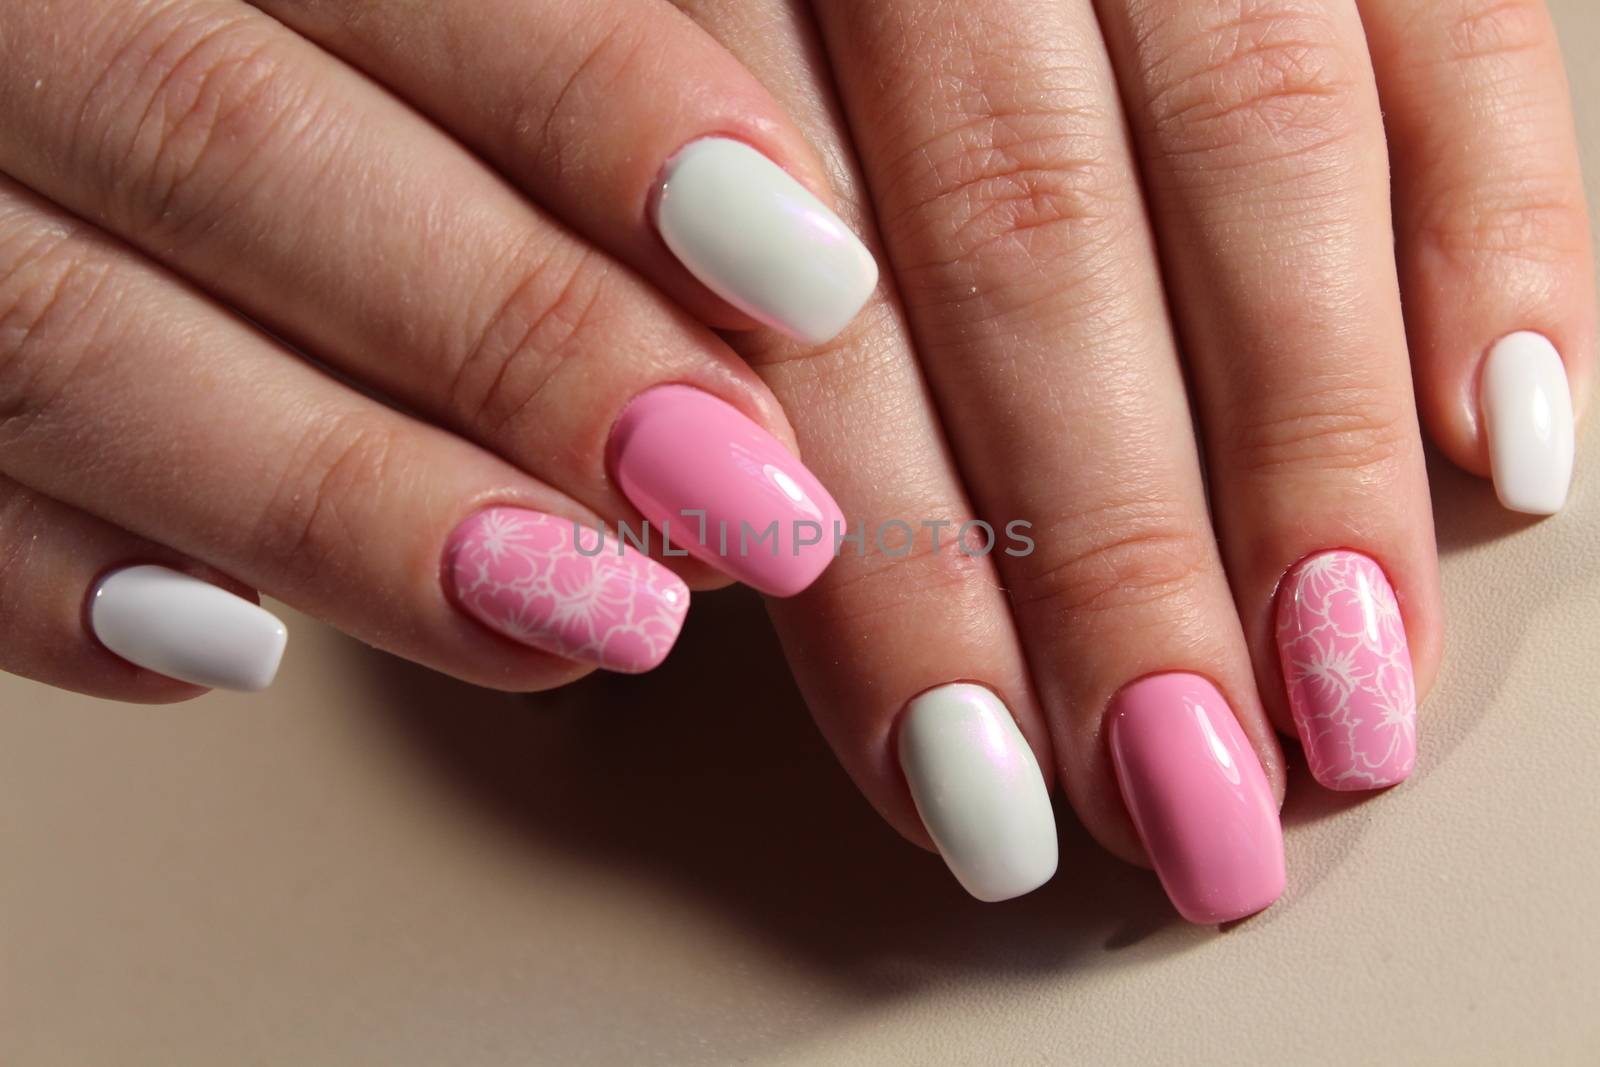 Fashionable design of manicure by SmirMaxStock